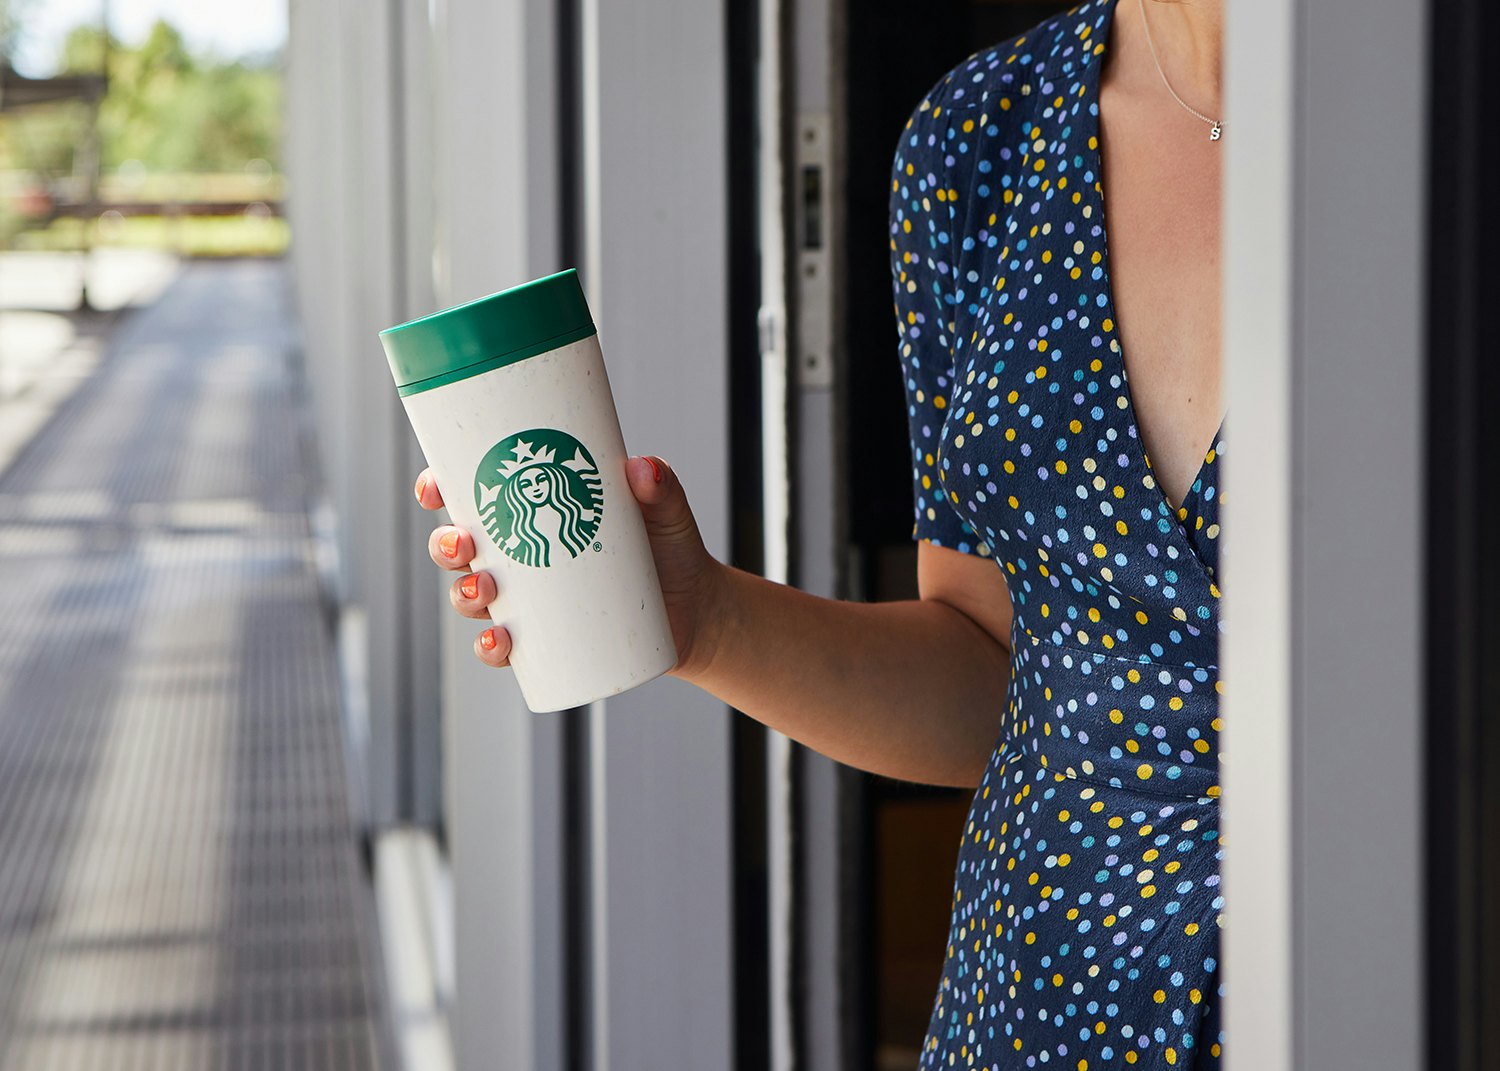 The Overlooked Way To Earn Starbucks Rewards With A Reusable Cup